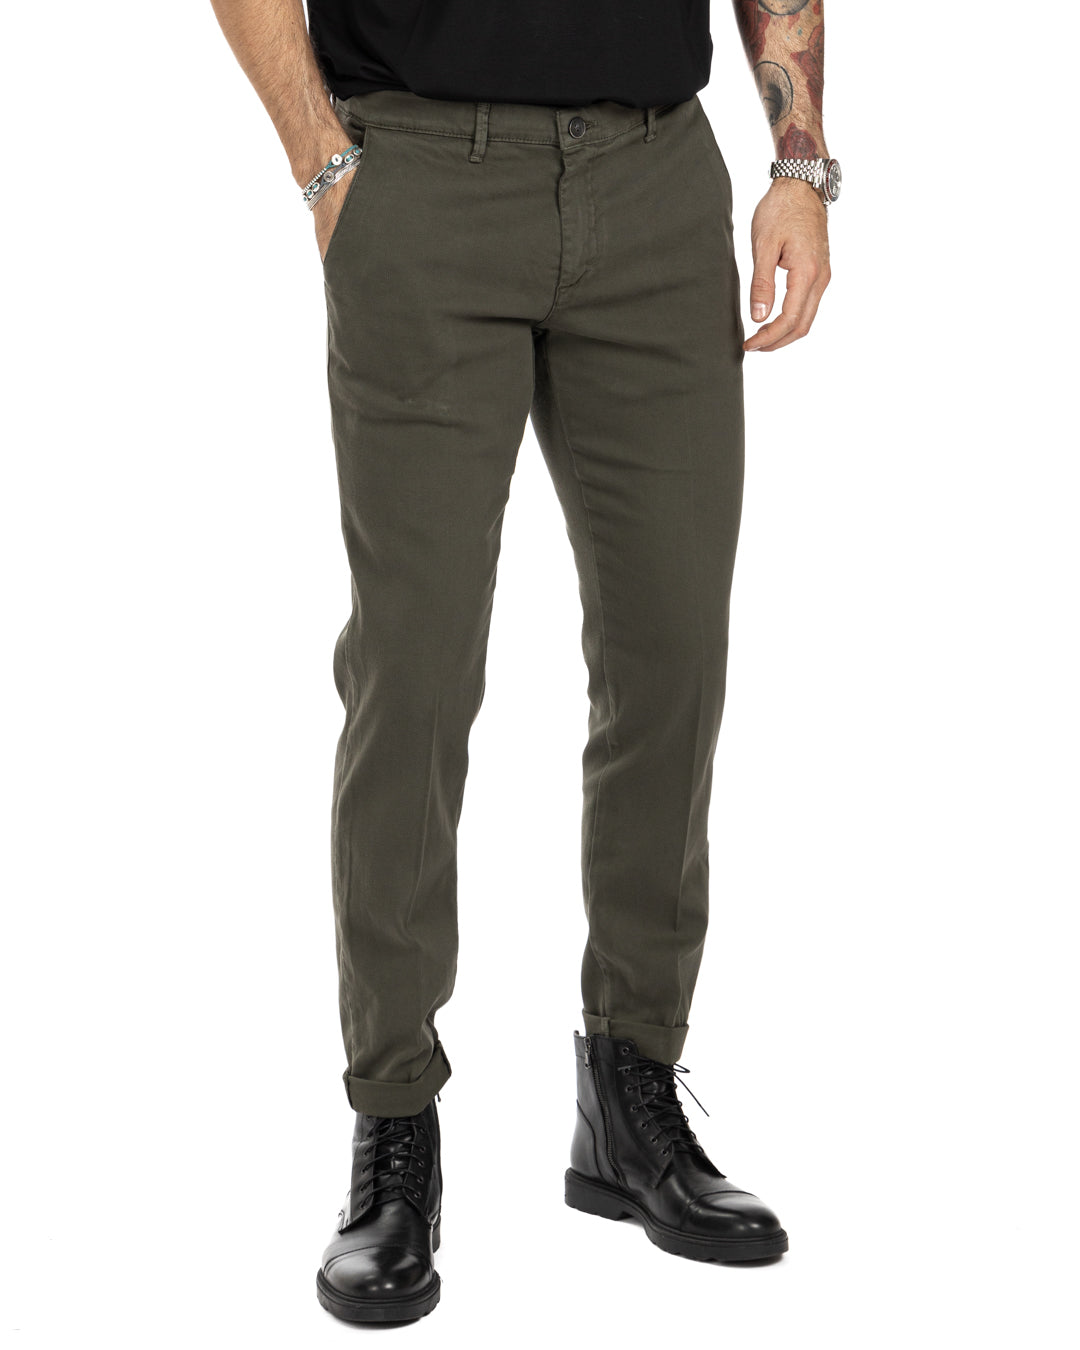 Jack - military armored trousers